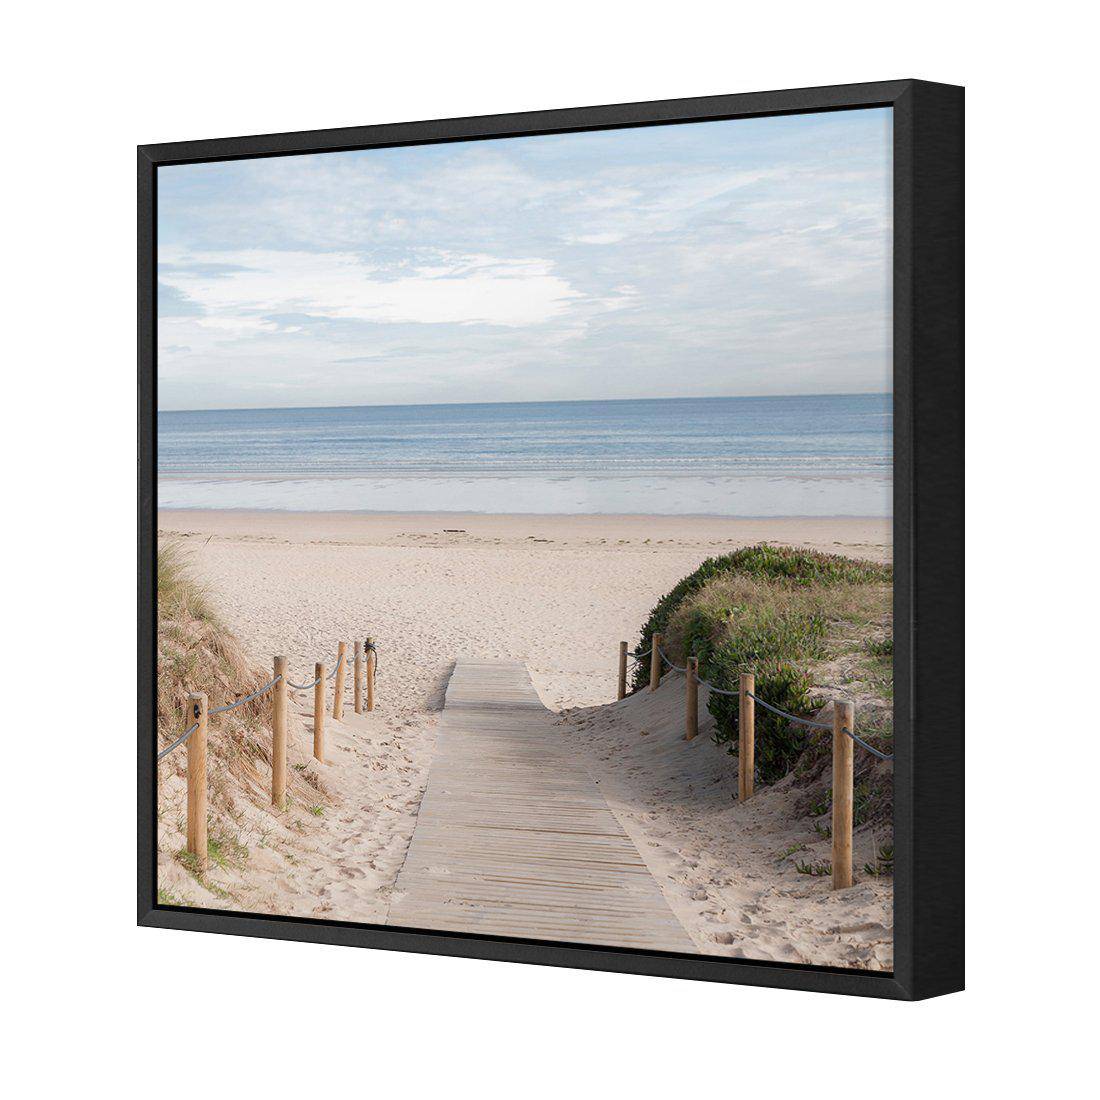 Pathway To The Sea Canvas Art-Canvas-Wall Art Designs-30x30cm-Canvas - Black Frame-Wall Art Designs